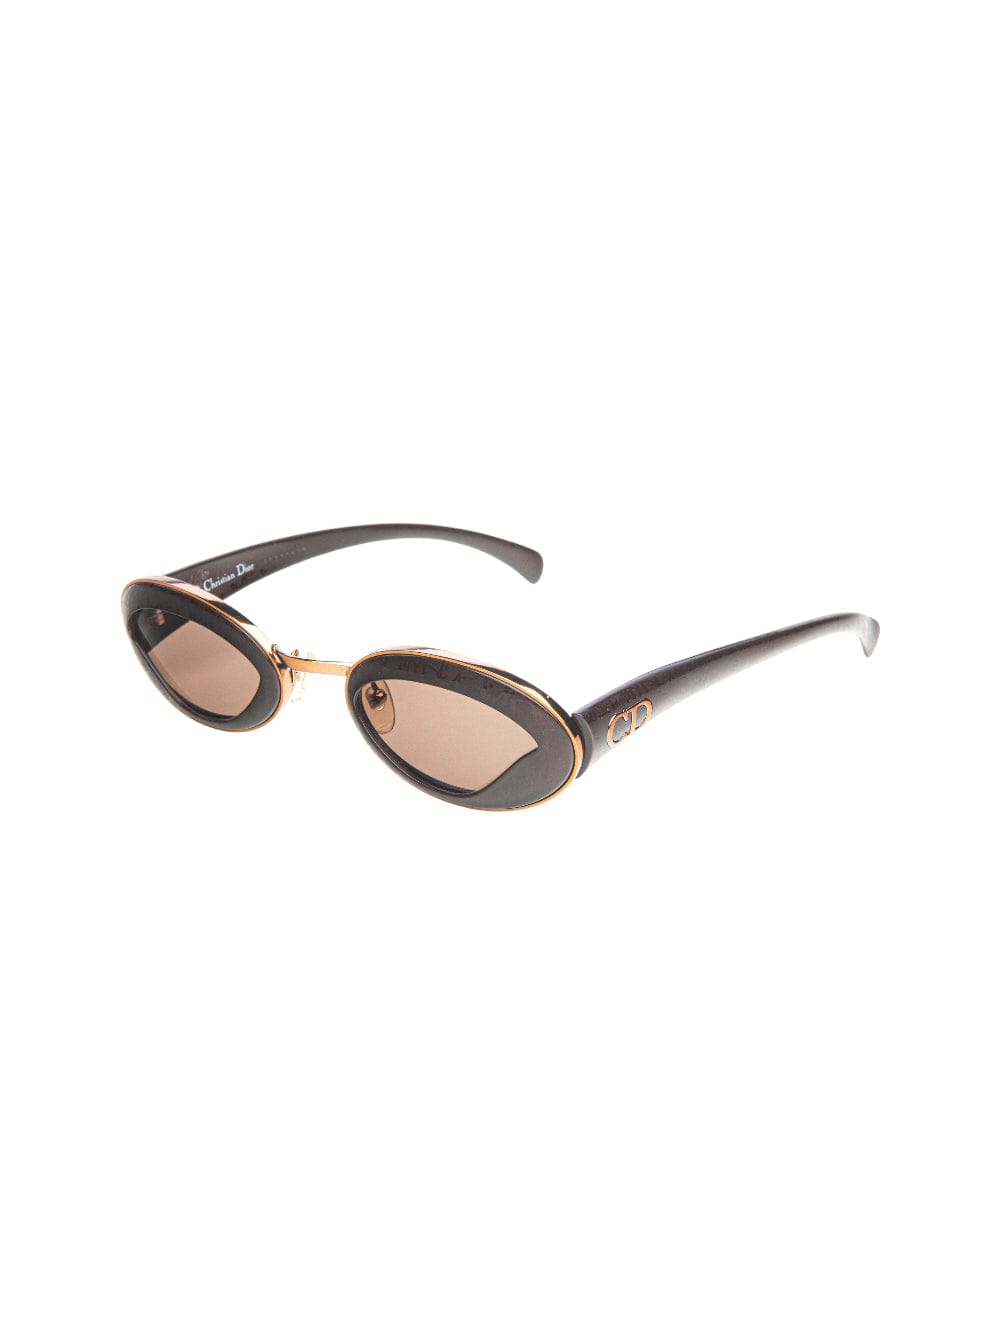 Dior Pin Up - Limited Edition - Dark Brown Sunglasses